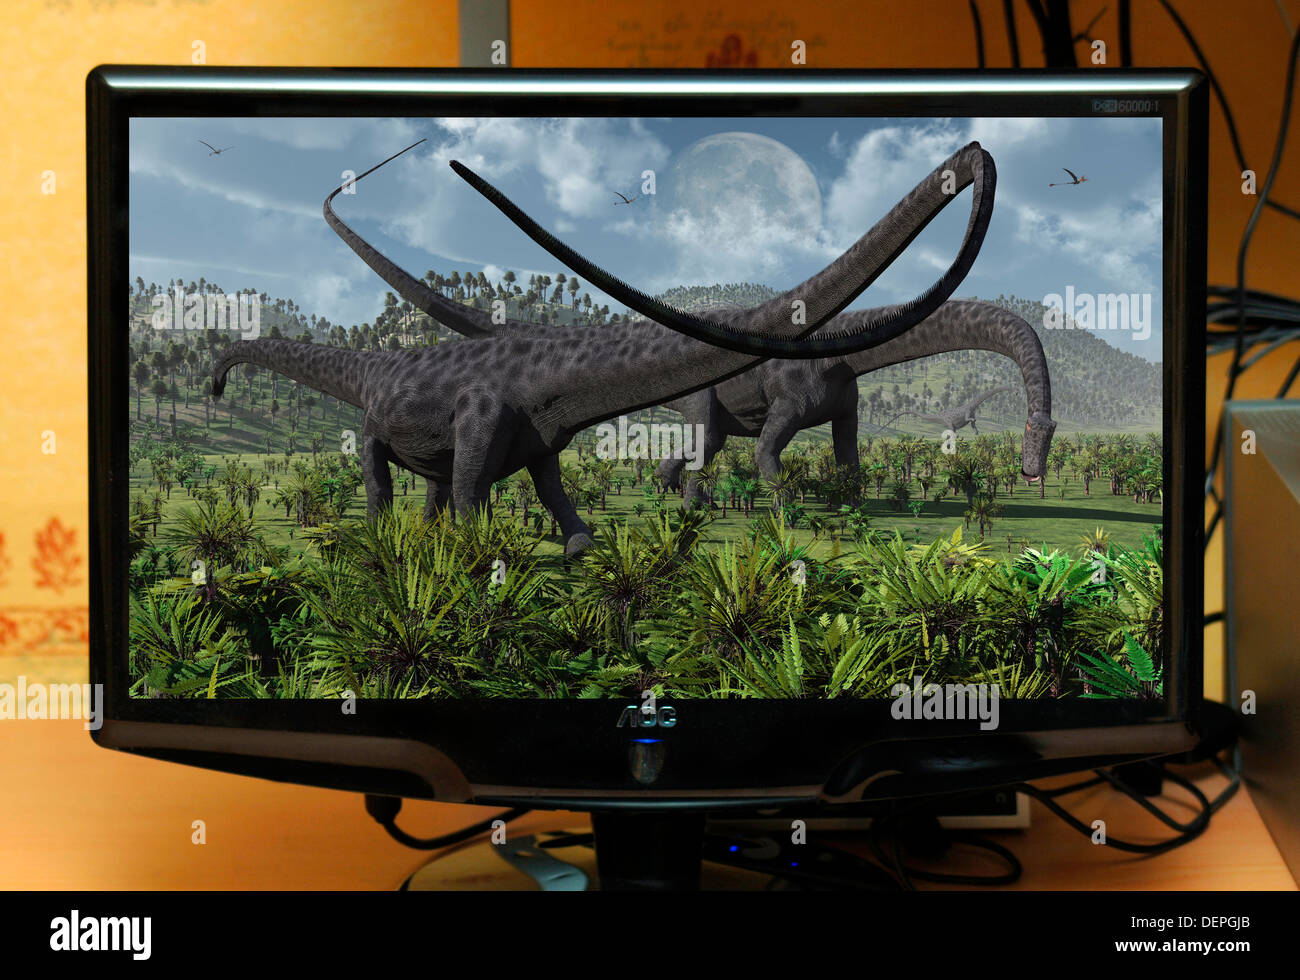 Diplodocus Dinosaurs 3D Graphic Image On A Computer Monitor Screen. Stock Photo